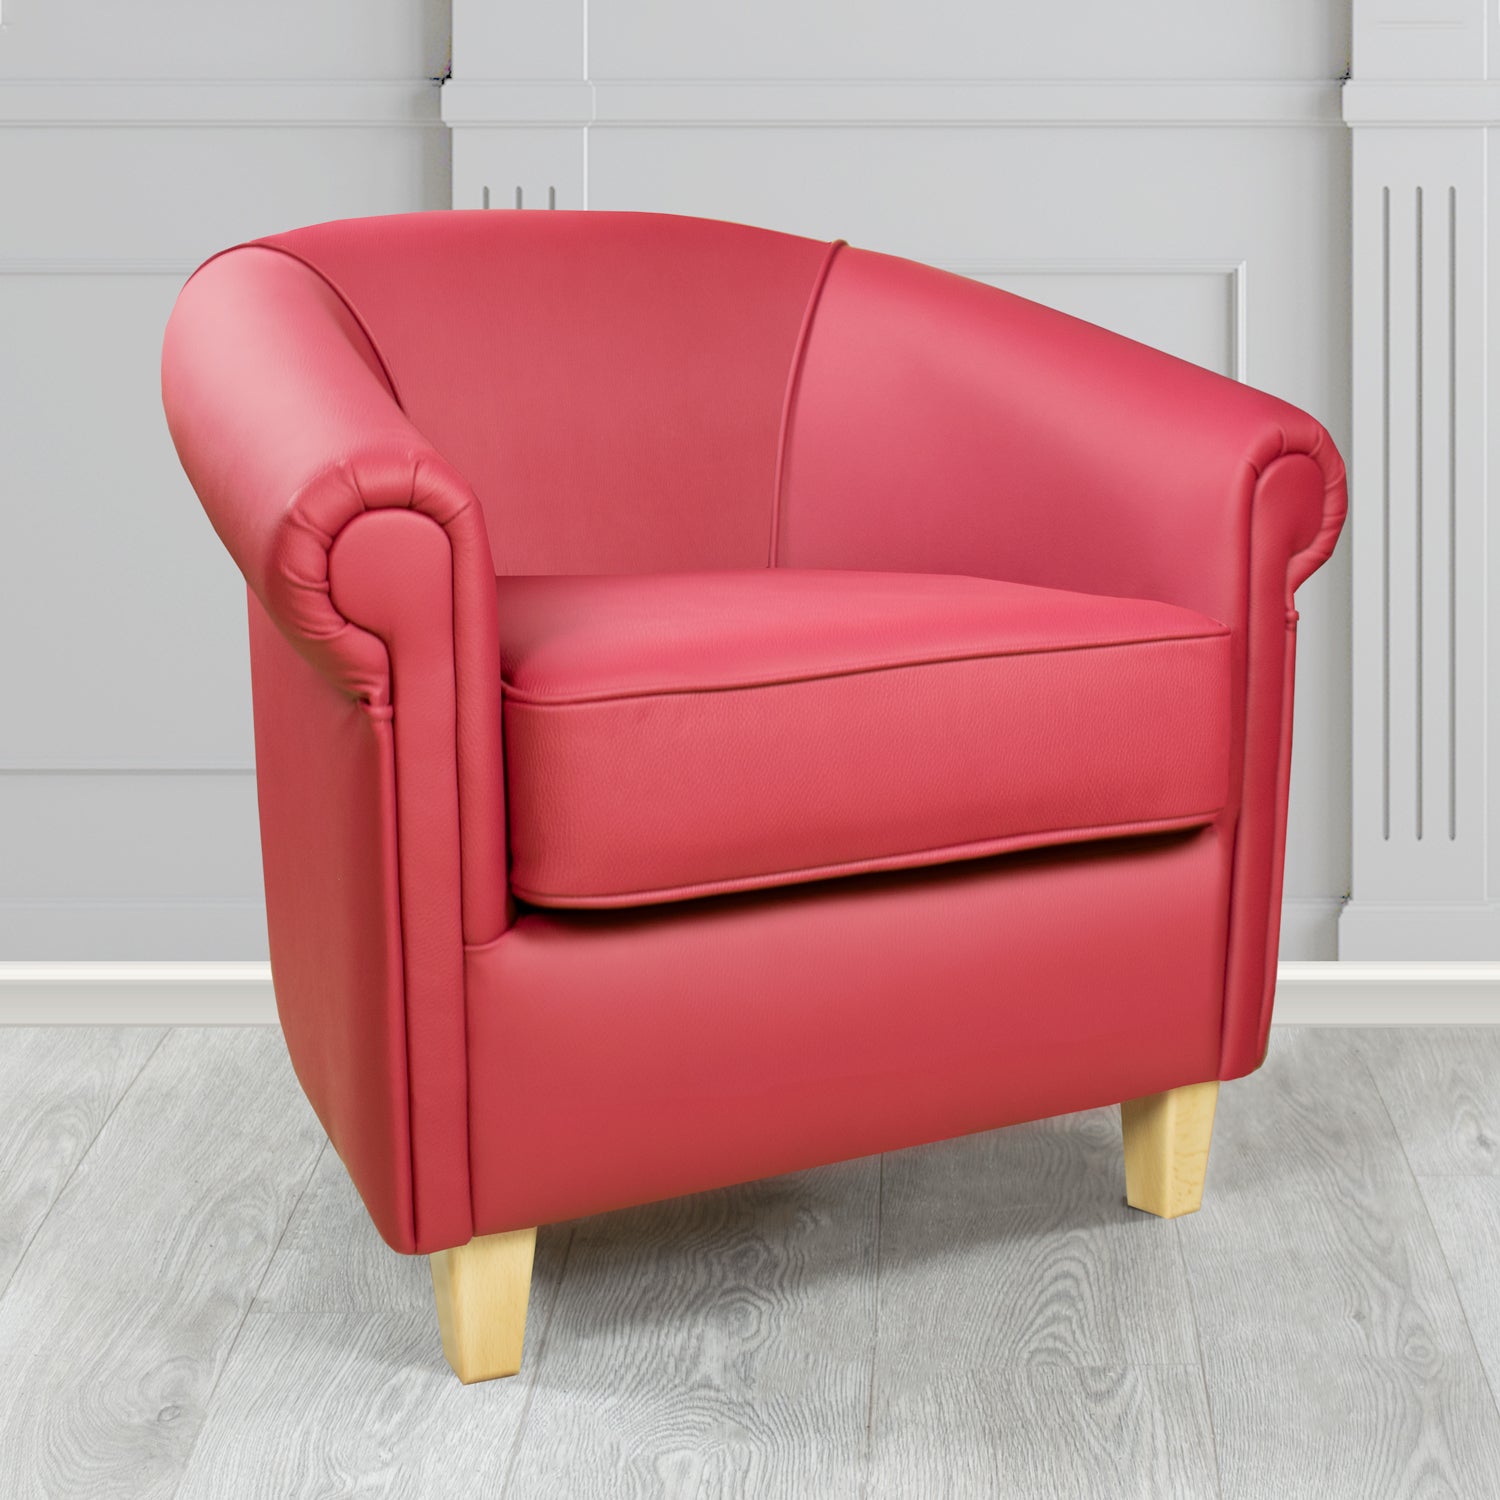 Siena Tub Chair in Crib 5 Shelly Velvet Red Genuine Leather - The Tub Chair Shop